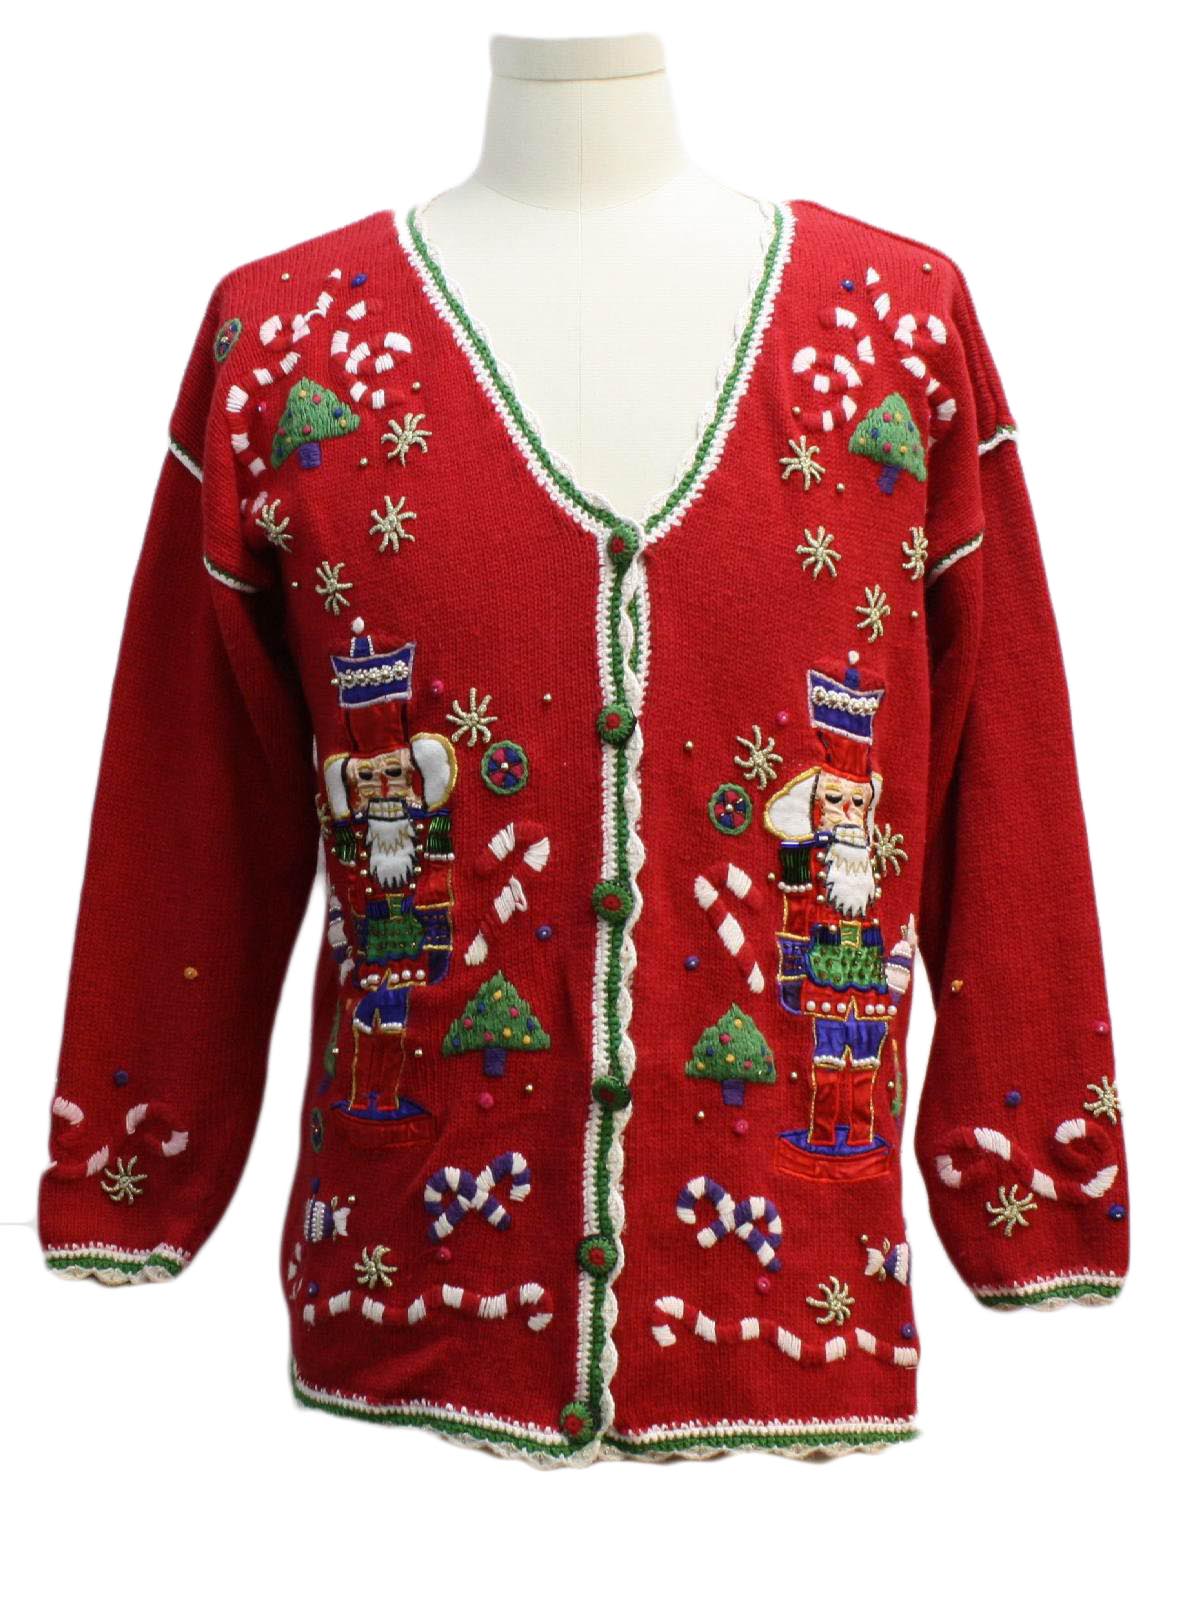 Ugly Christmas Cardigan Sweater: -Work in Progress- Unisex red ...